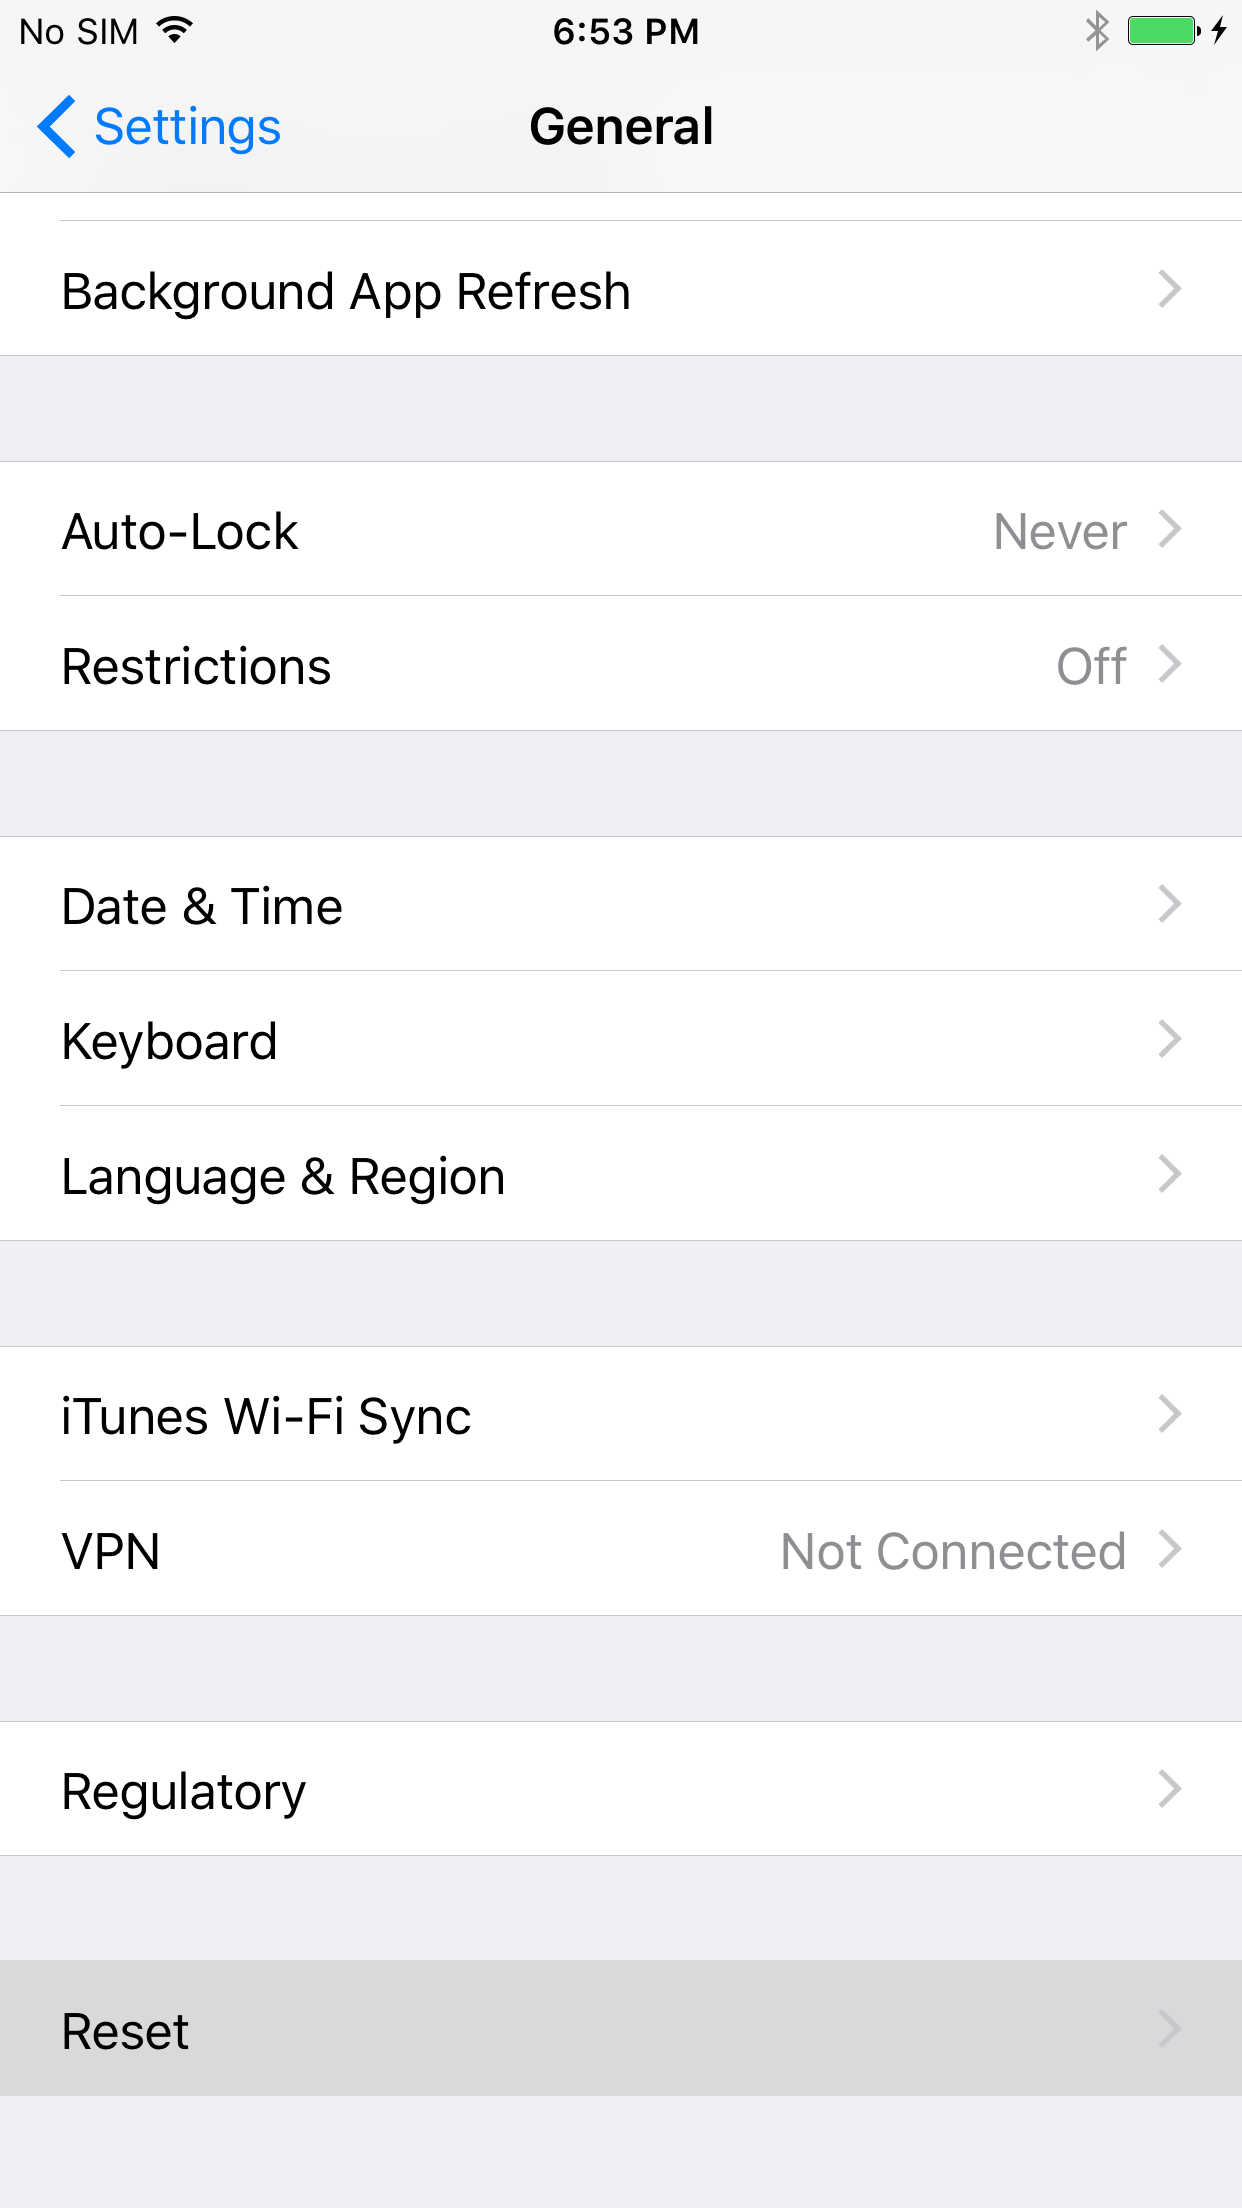 How to Reset Your Network Settings on the iPhone [Video]